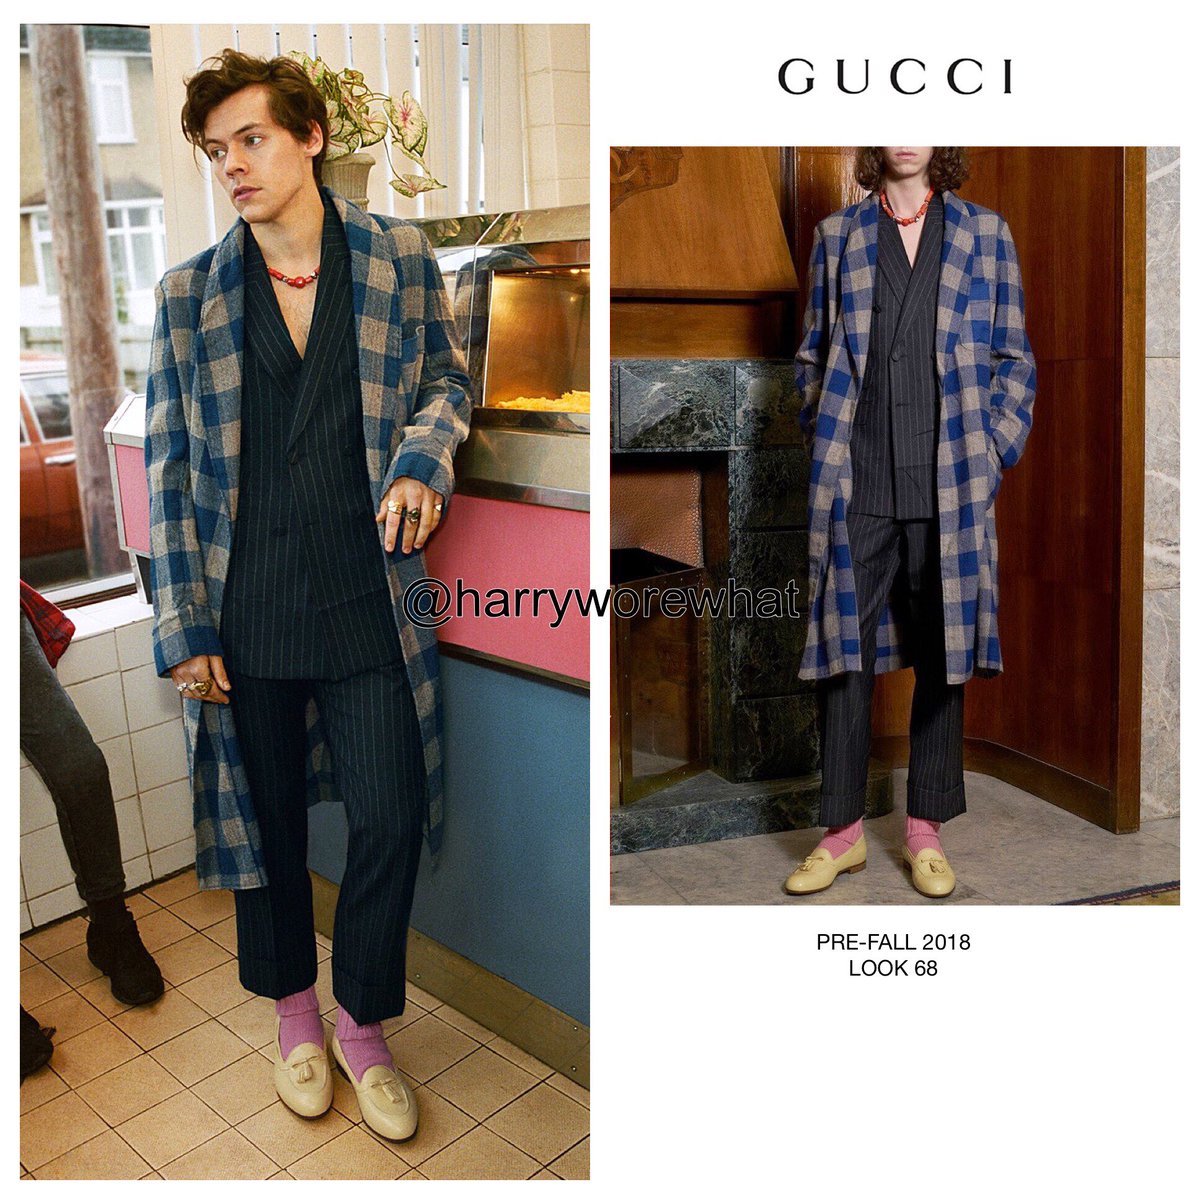 Harry wore #Gucci Pre-Fall 2018 Look 68 for the new #GucciTailoring campaign. gucci.com/uk/en_gb/shop-…

Creative Director: #AlessandroMichele
Photographer: #GlenLuchford
Art Director: #ChristopherSimmonds